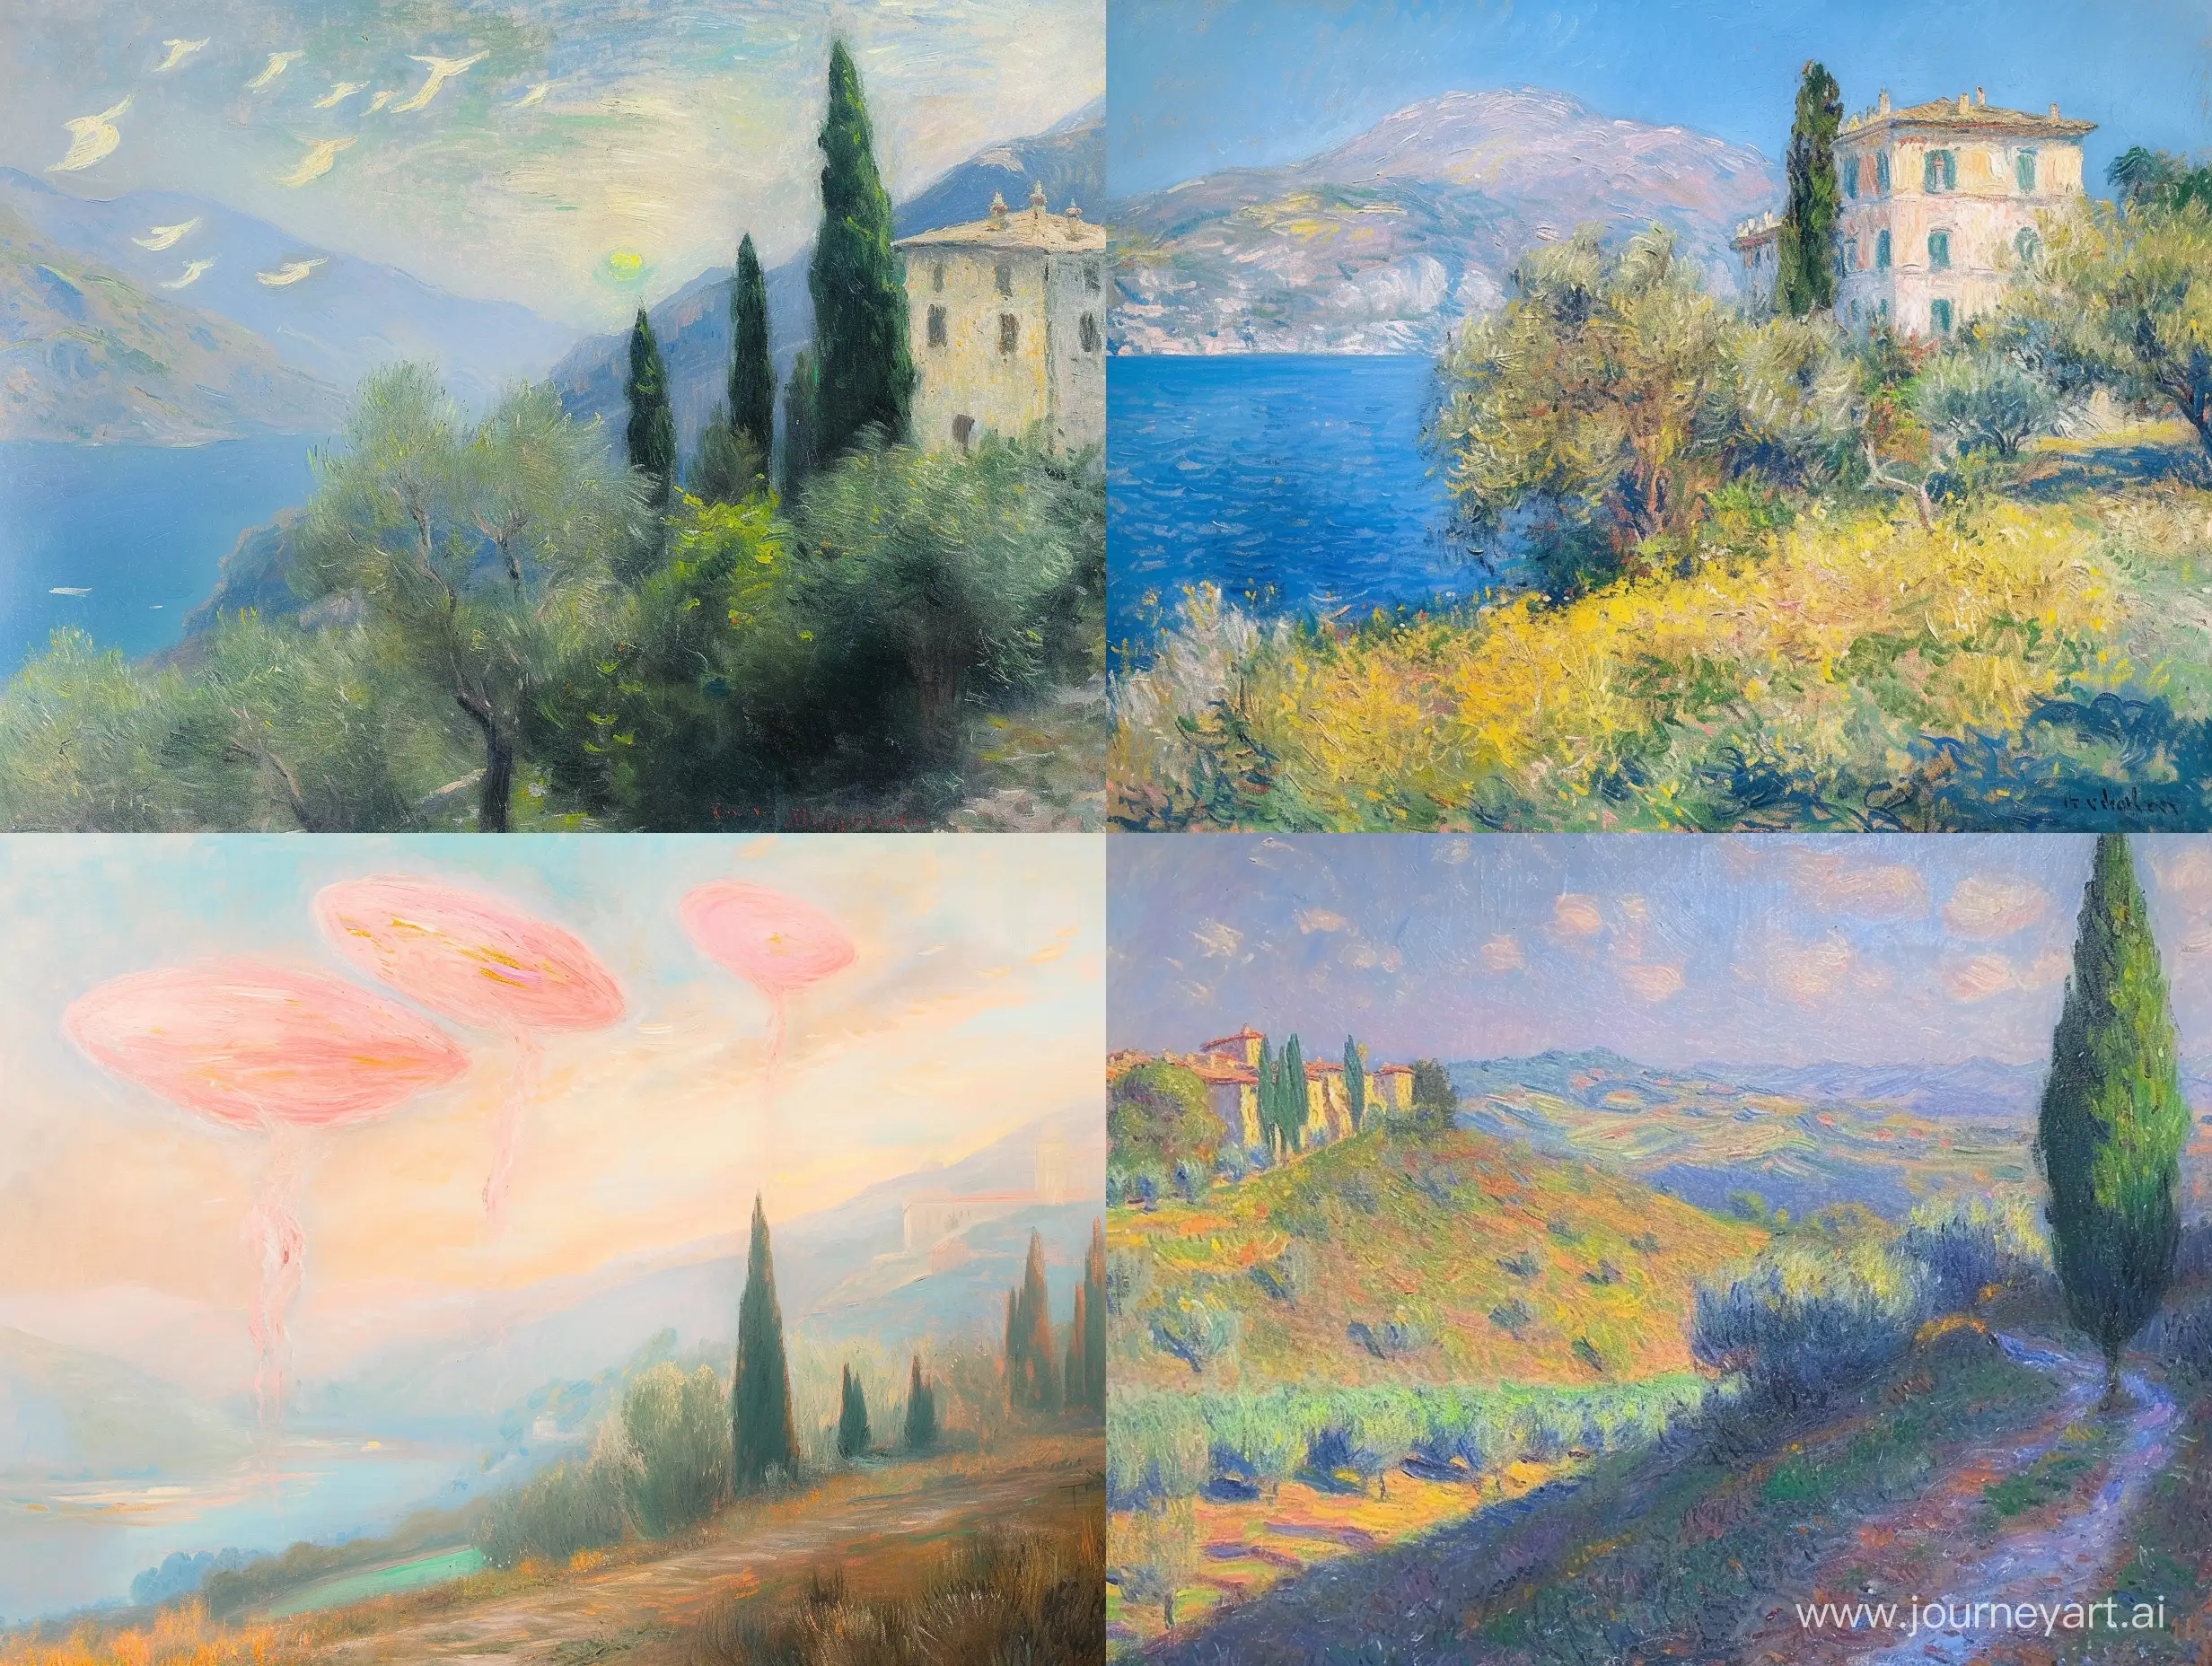 A painting of a Italian landscape image in the style of Monet with Meeting and floating effects